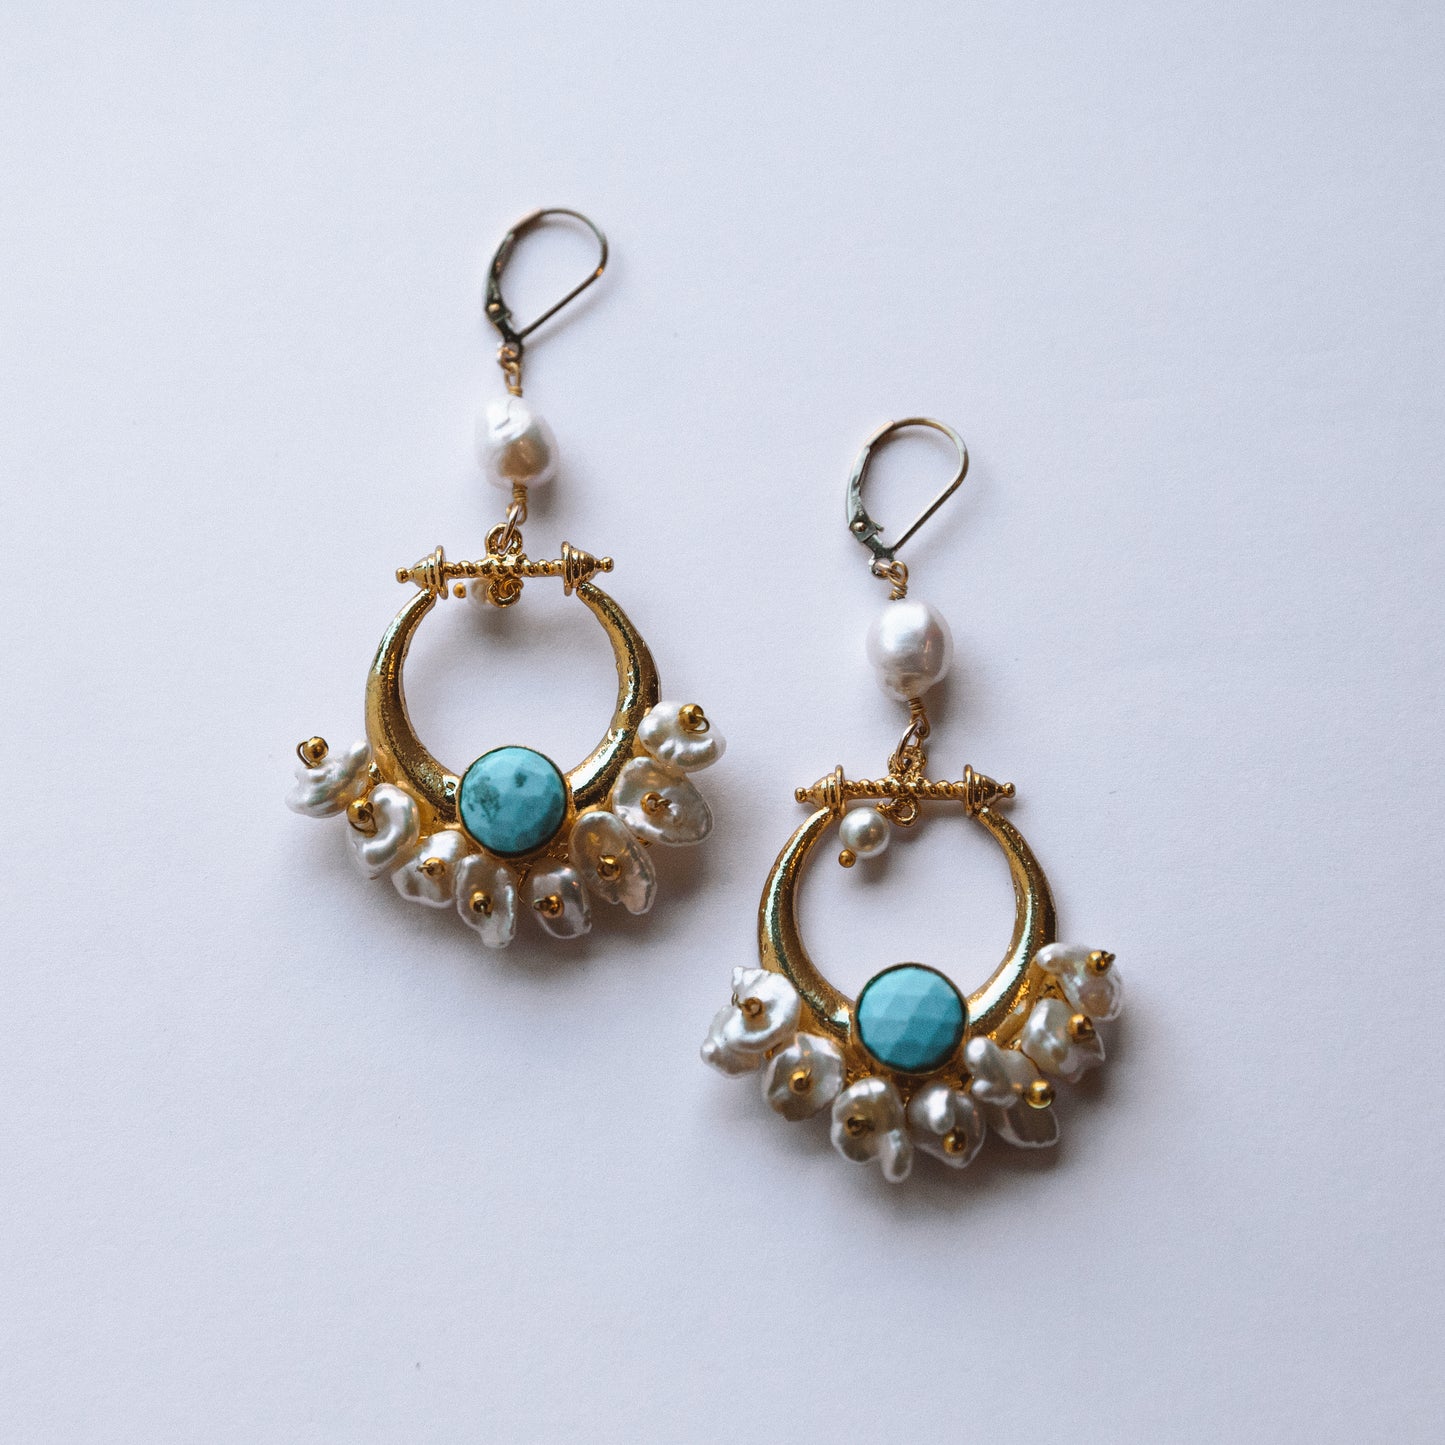 The Turquoise Pearl Statement Earrings